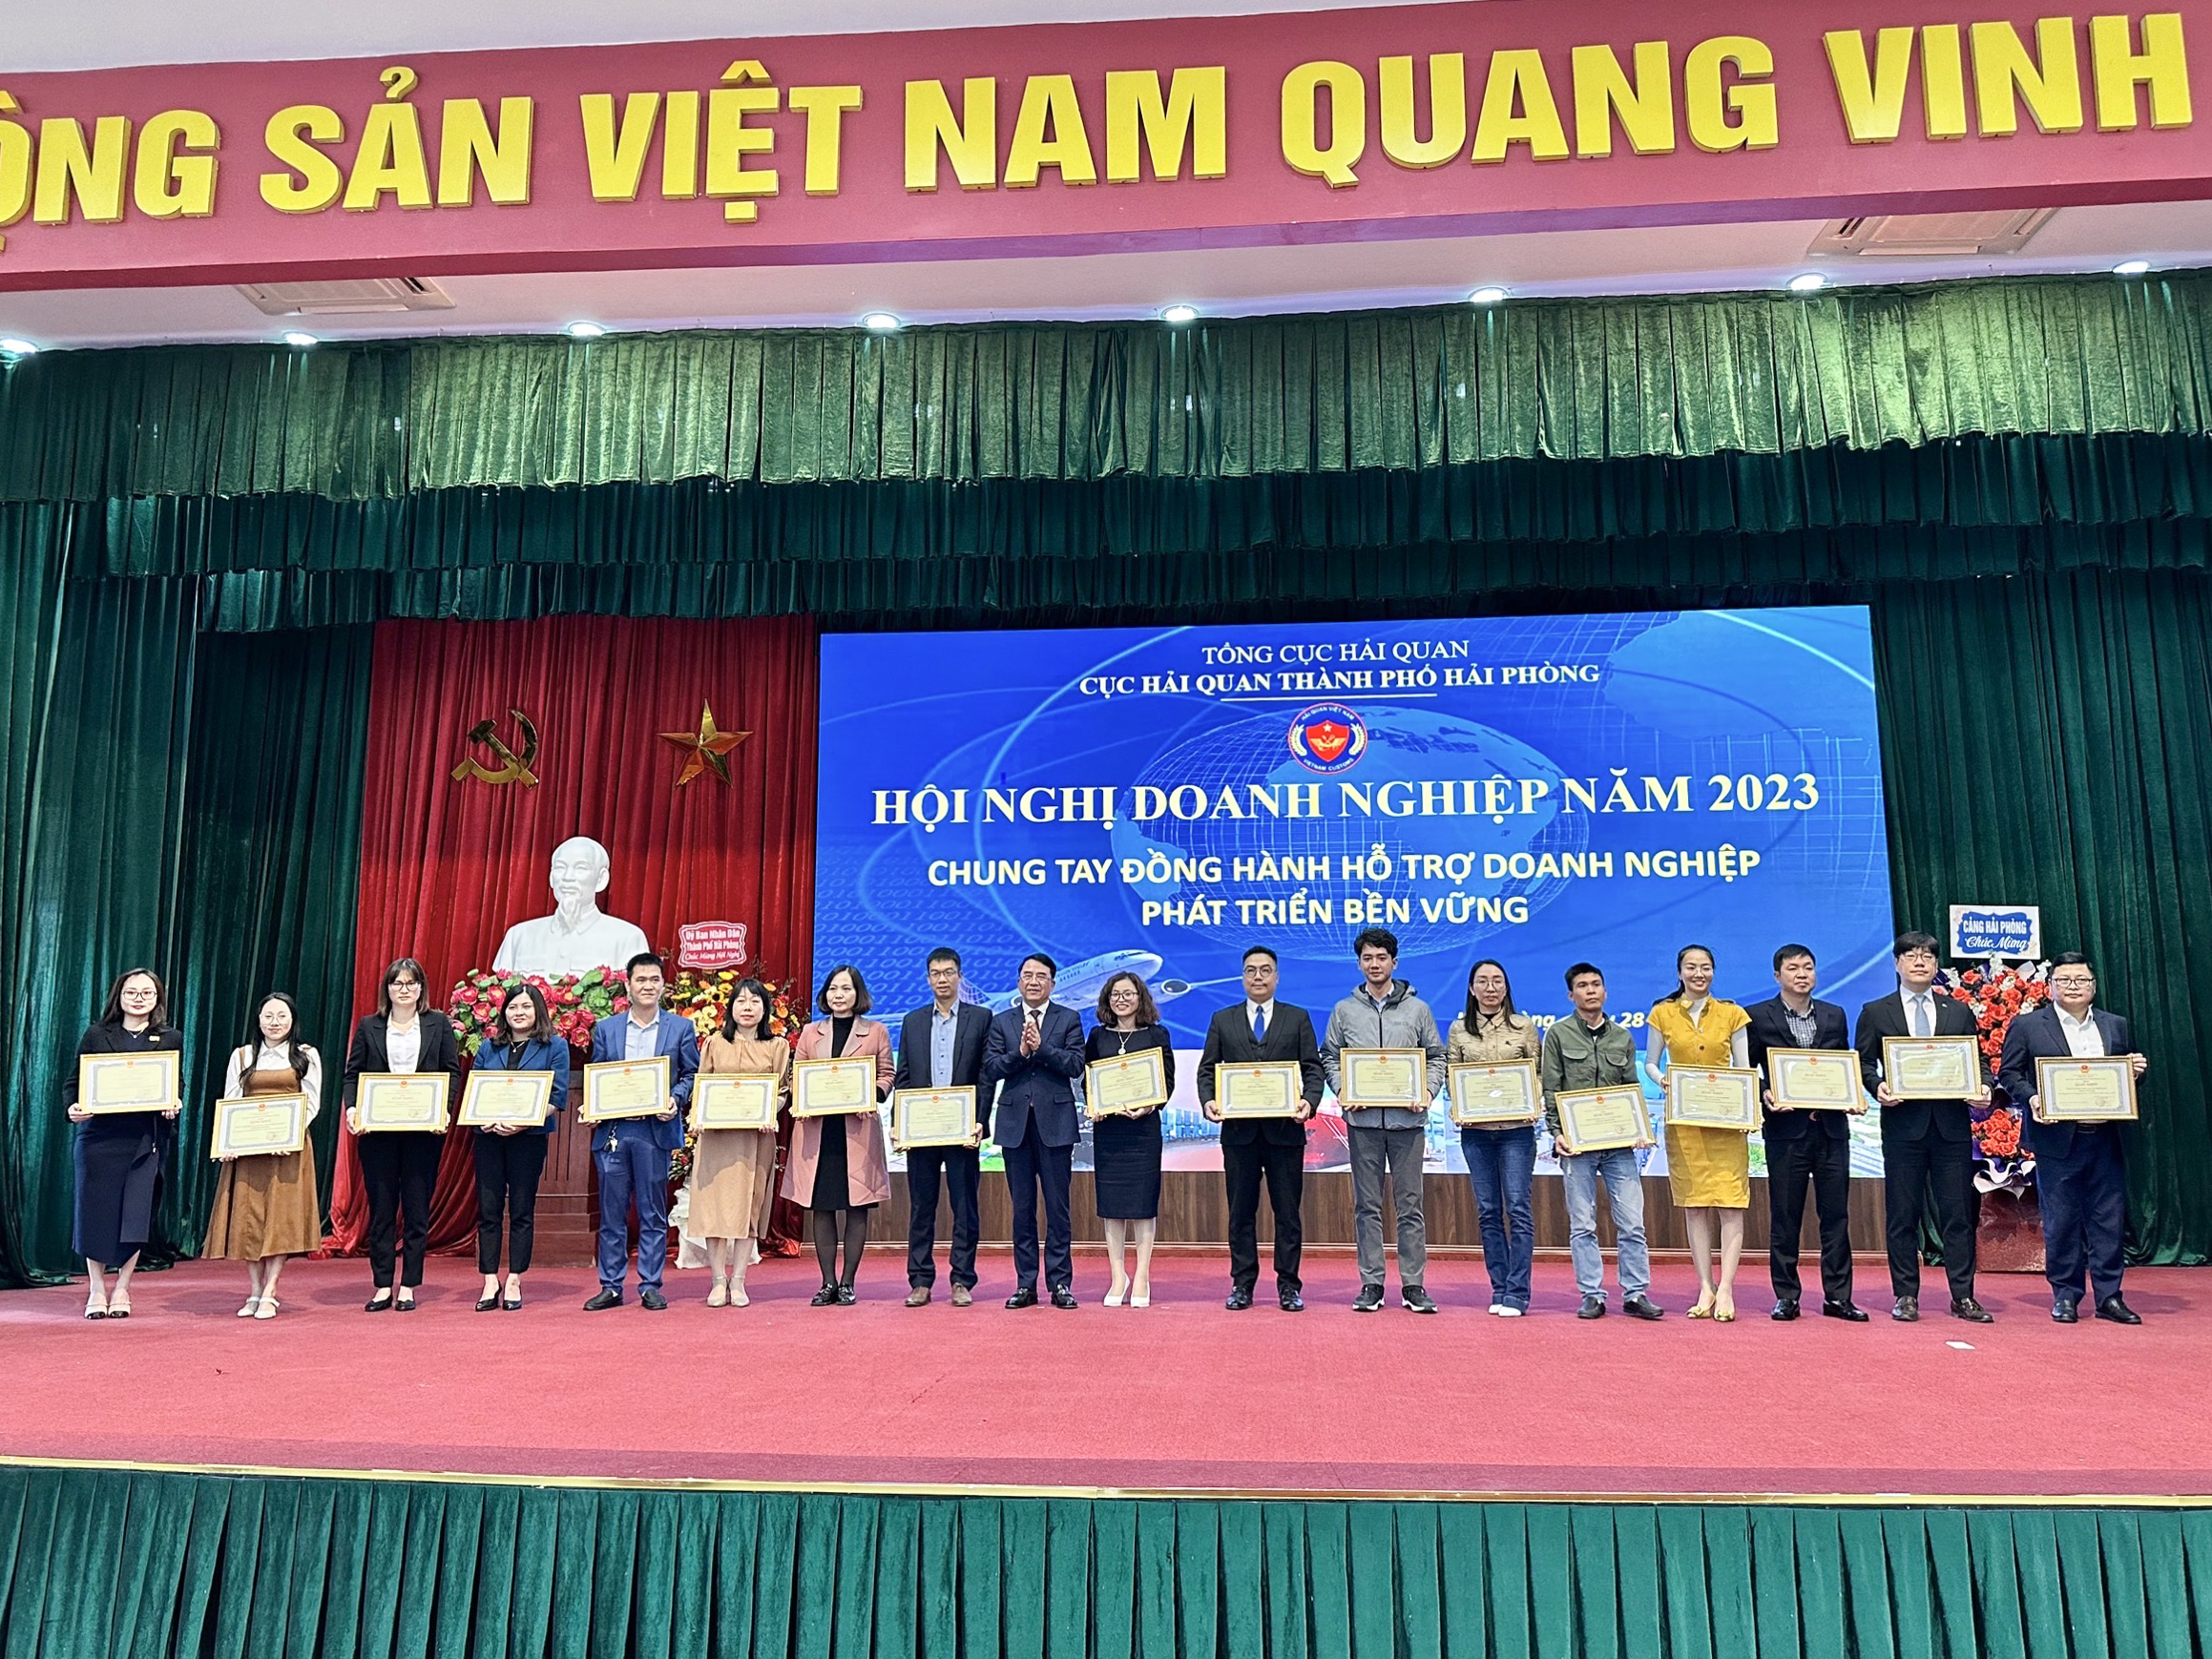 Certificate of Merit from Hai Phong City People's Committee